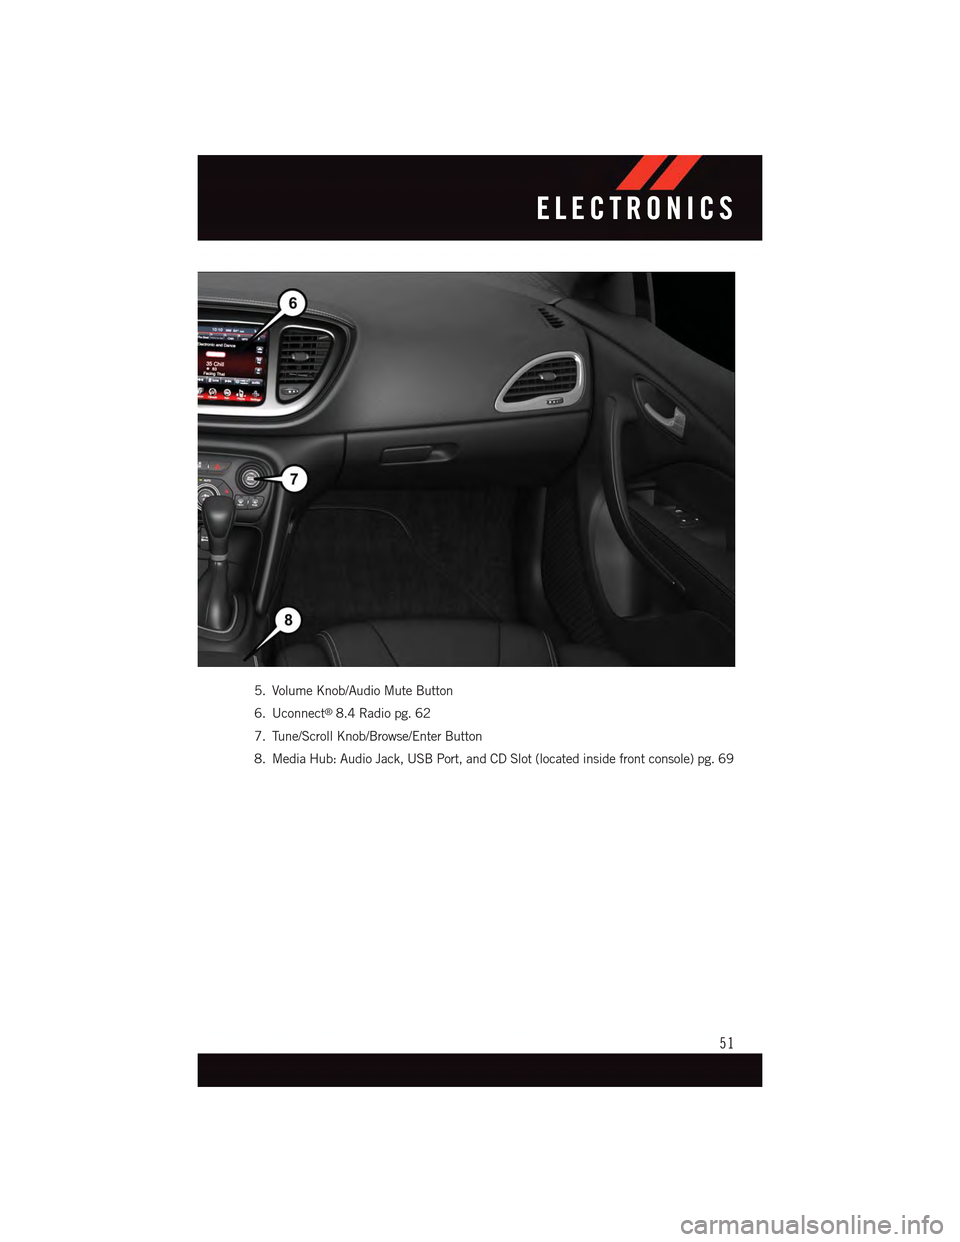 DODGE DART 2015 PF / 1.G Workshop Manual 5. Volume Knob/Audio Mute Button
6. Uconnect®8.4 Radio pg. 62
7. Tune/Scroll Knob/Browse/Enter Button
8. Media Hub: Audio Jack, USB Port, and CD Slot (located inside front console) pg. 69
ELECTRONICS